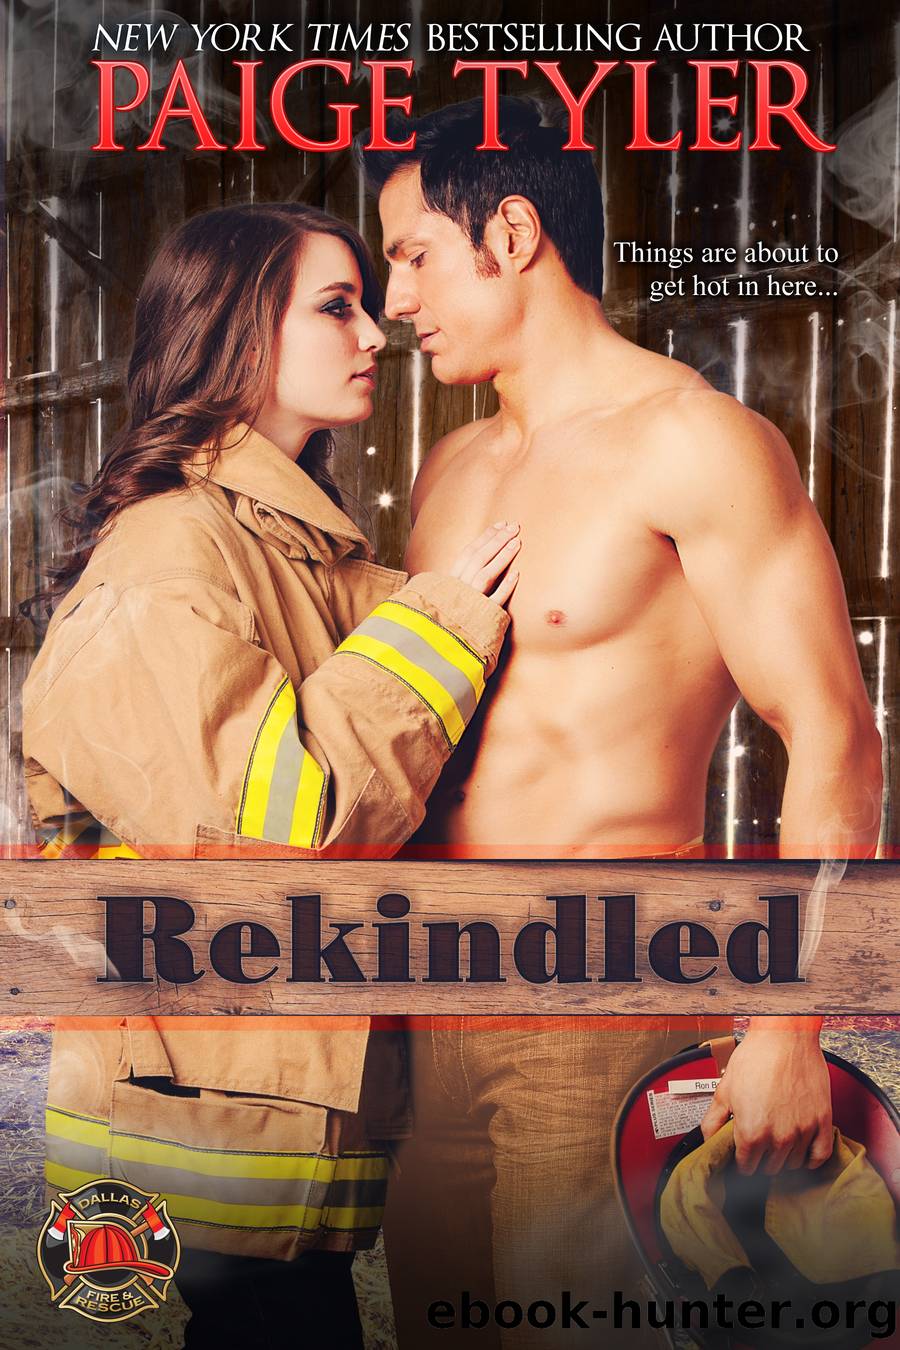 Rekindled by Paige Tyler